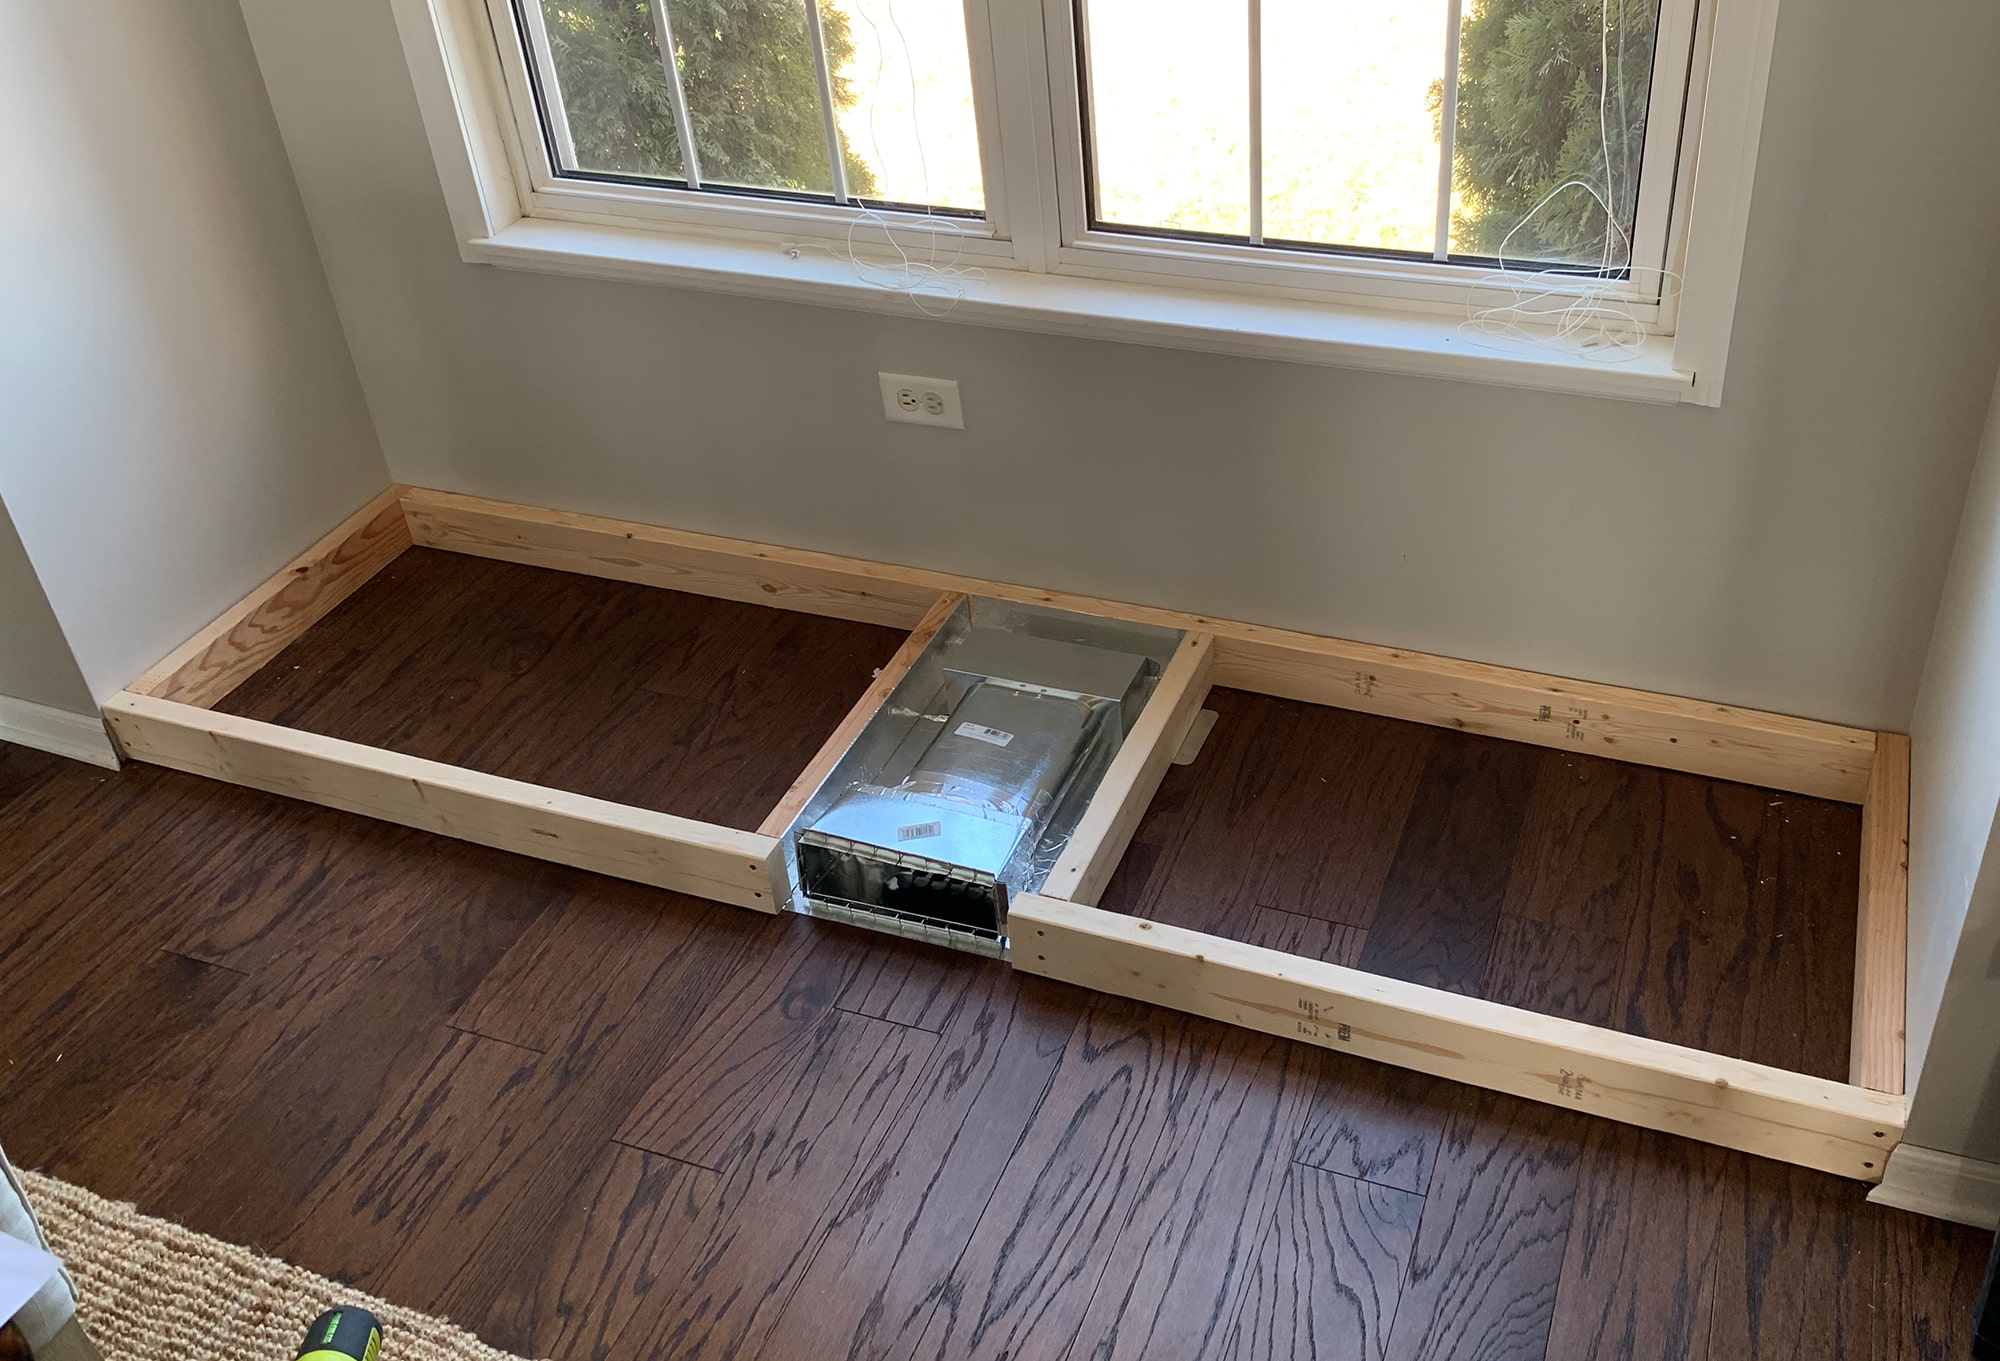 Floor Support Added